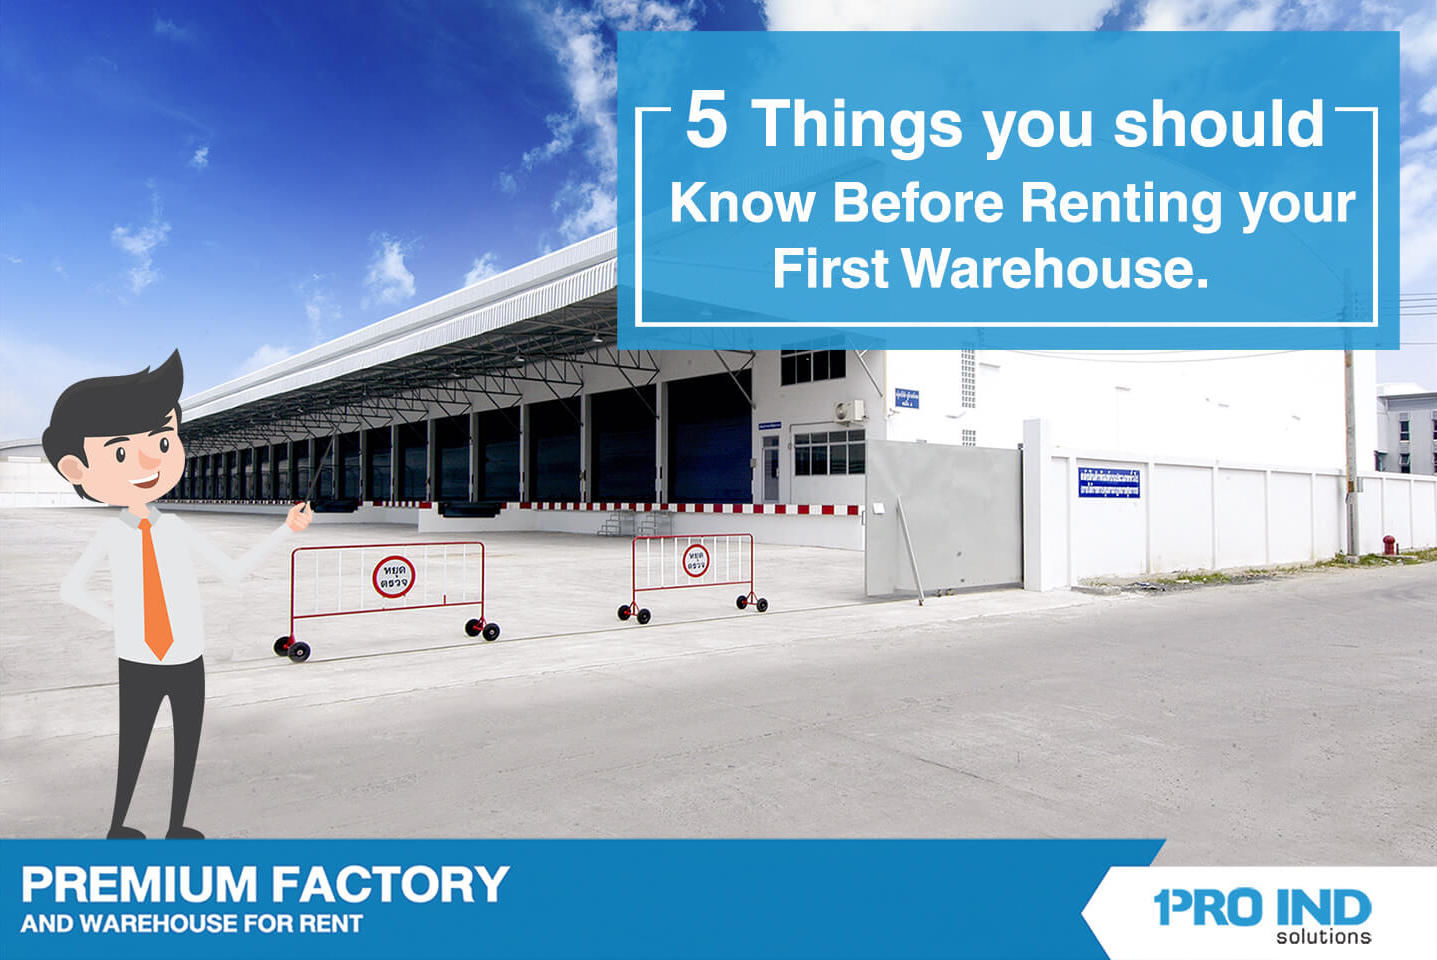 We present five essential elements in selecting a warehouse. These critical factors can help you intelligently evaluate the choices offered and select the most suitable one.